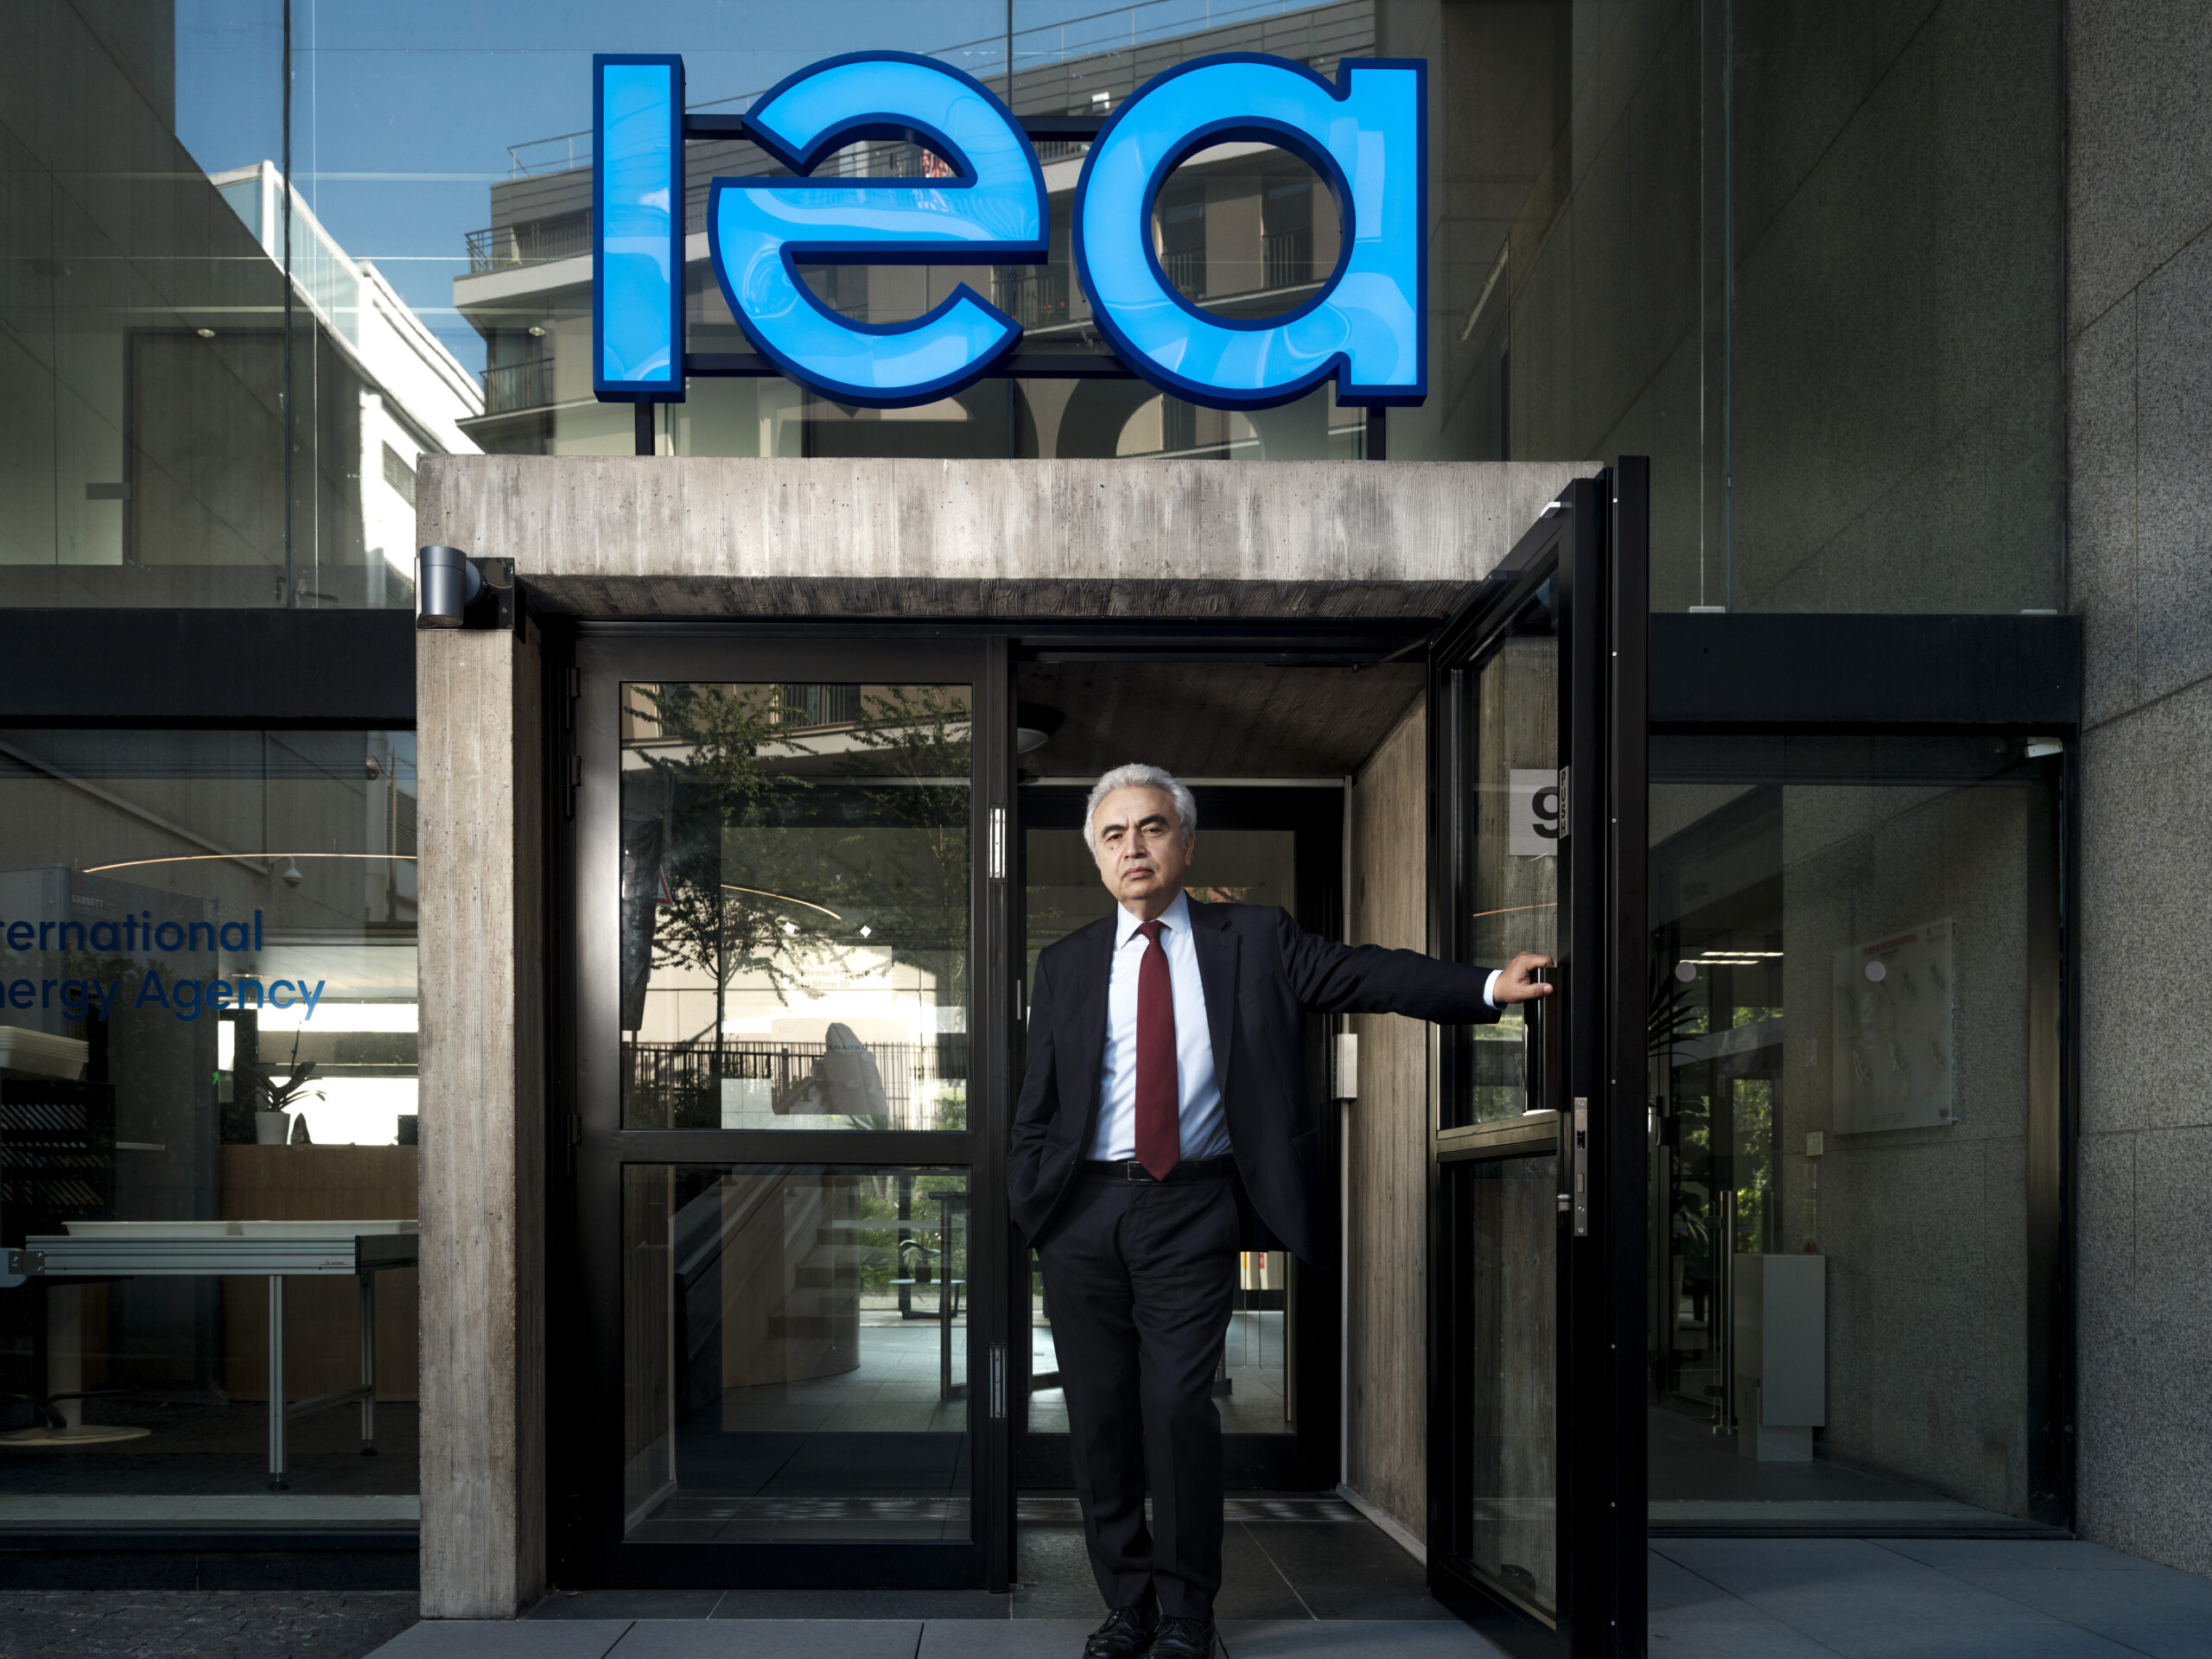 A man stands holding open a glass door, looking at the camera, with a sign that says "IEA" in big blue letters above the door. 